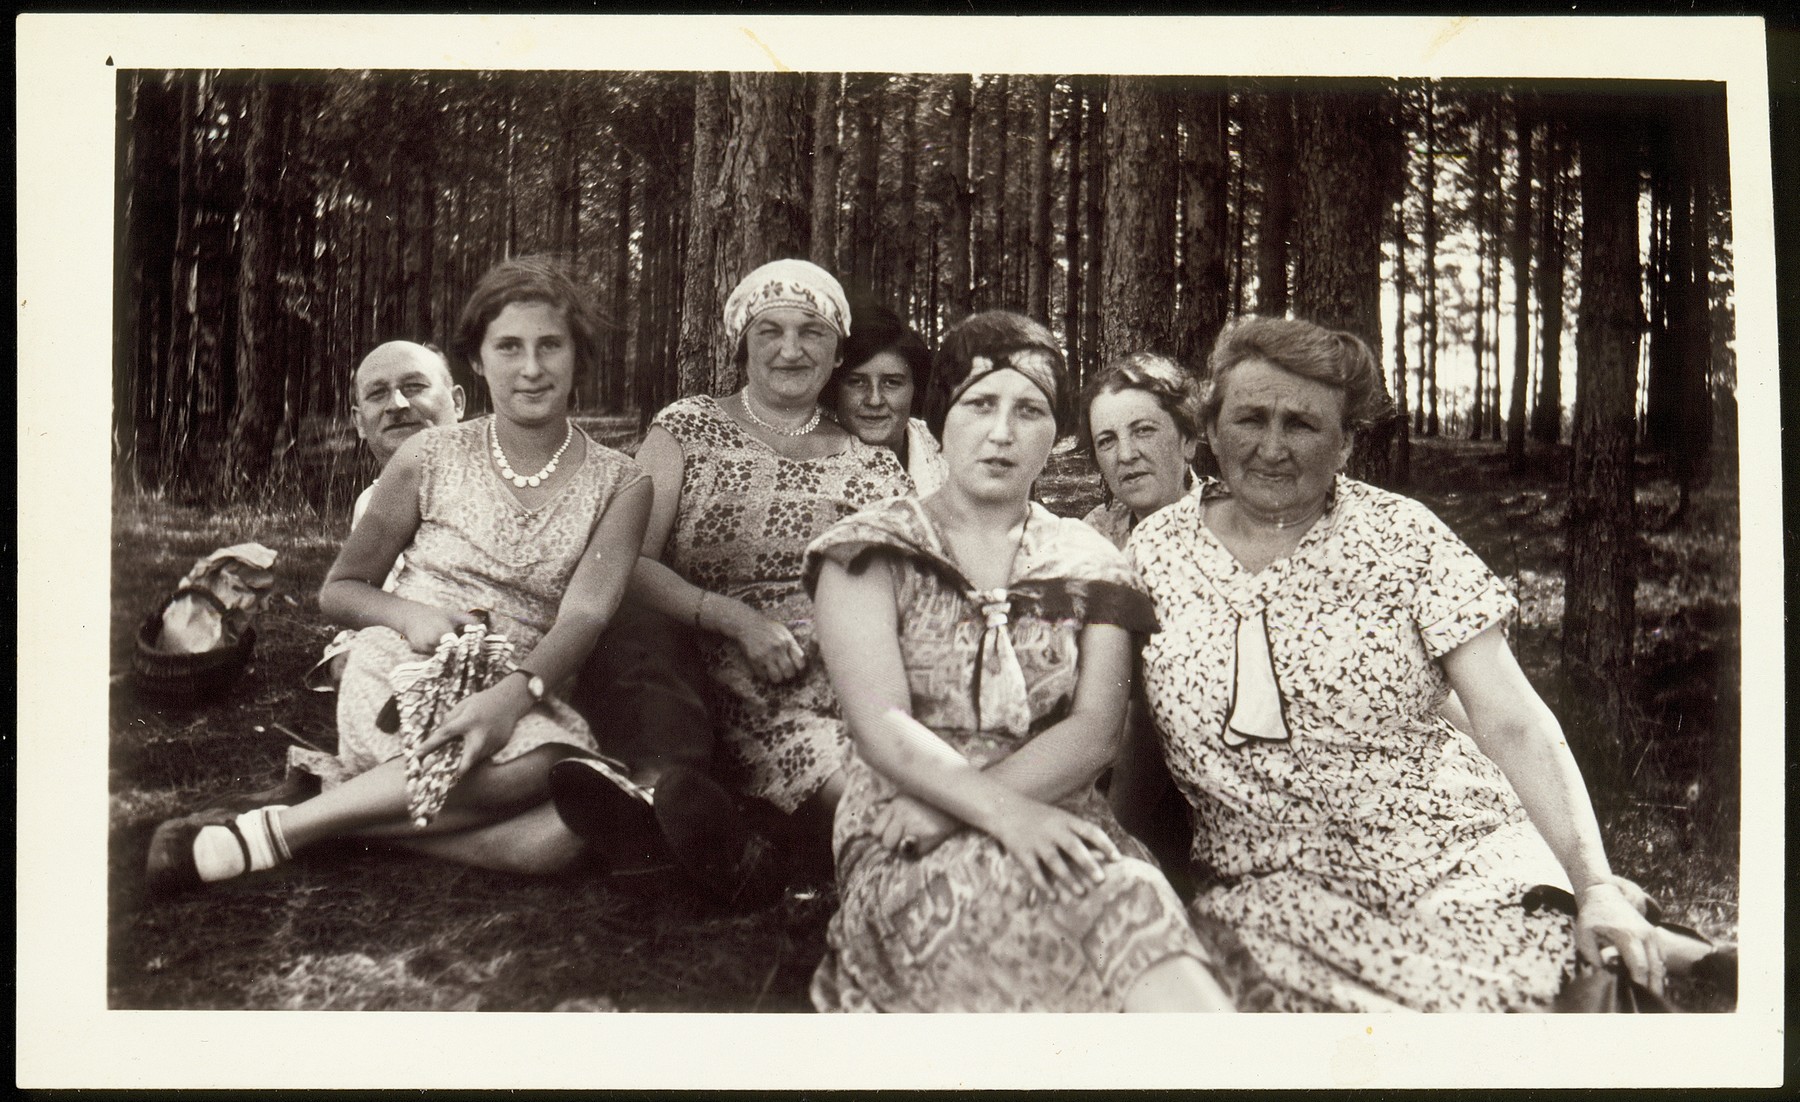 Family portrait taken in a wooded area not far from Vilna.

Front row, from right to left; Annie Virshubski Foster, Margolia Saposnikow, Sonia Virshubski Saposnikow and Nachama Saposnikow. Sitting in the back from right to left, Mrs Levenson, Golda (last name unknown) and Hillel Saposnikow.